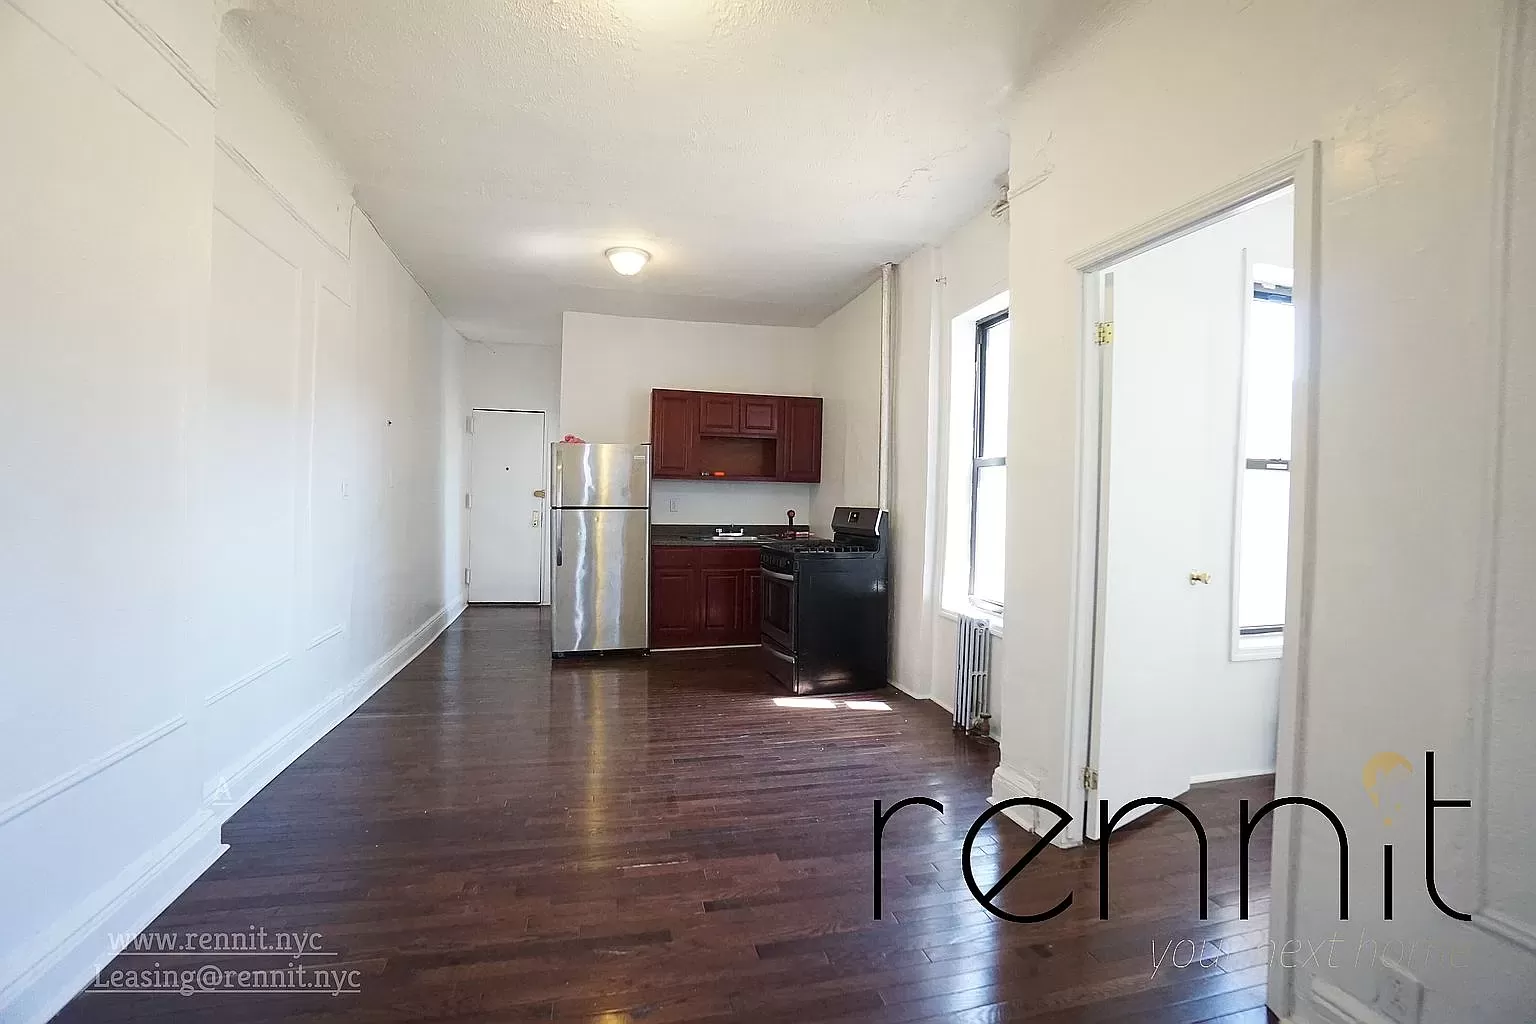 Apartment for Rent in Sunset Park, Brooklyn NY